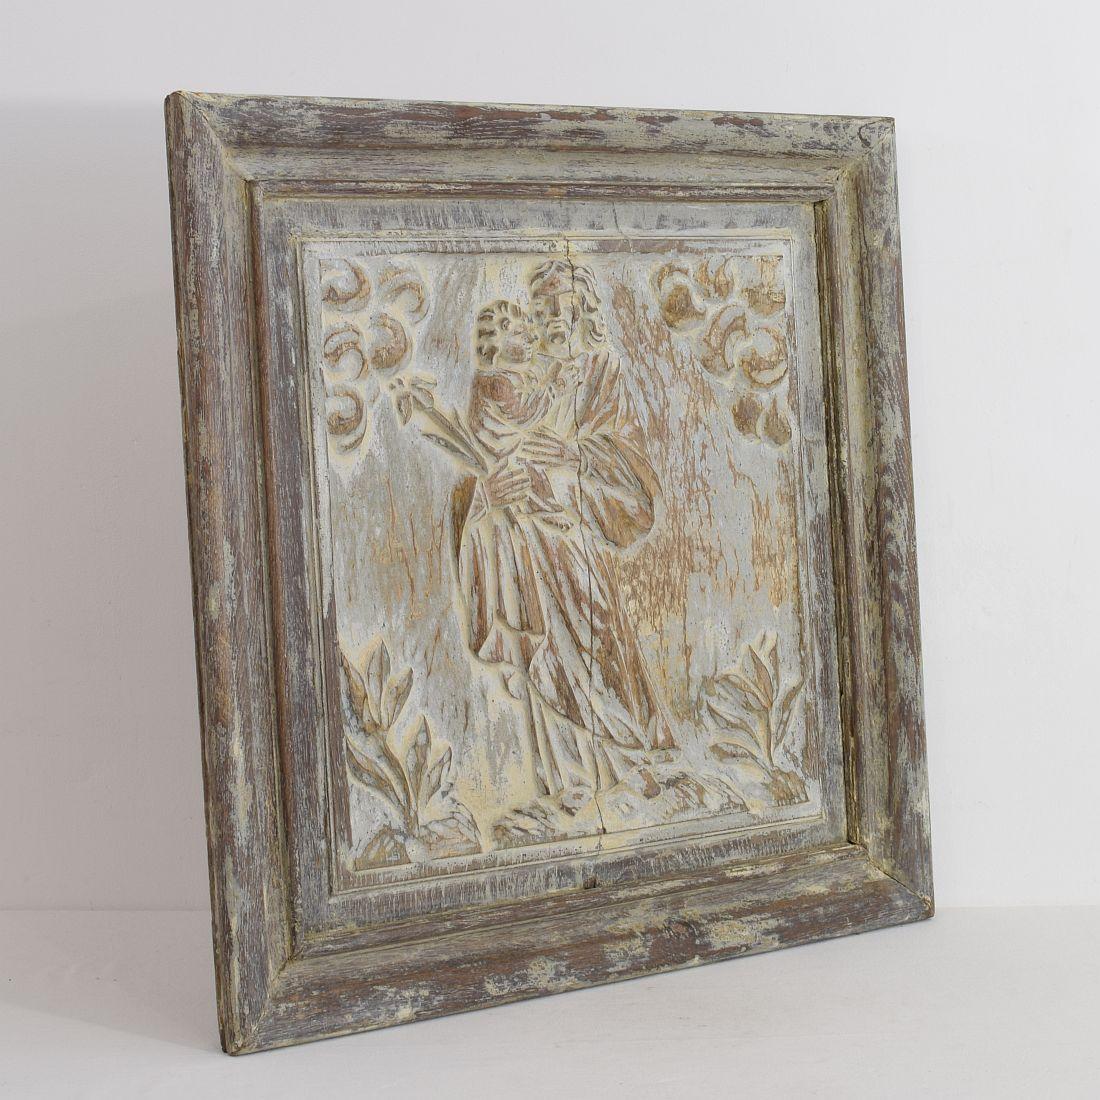 Beautiful weathered oak panel with traces of its original colors.

France circa 1750, weathered small losses.